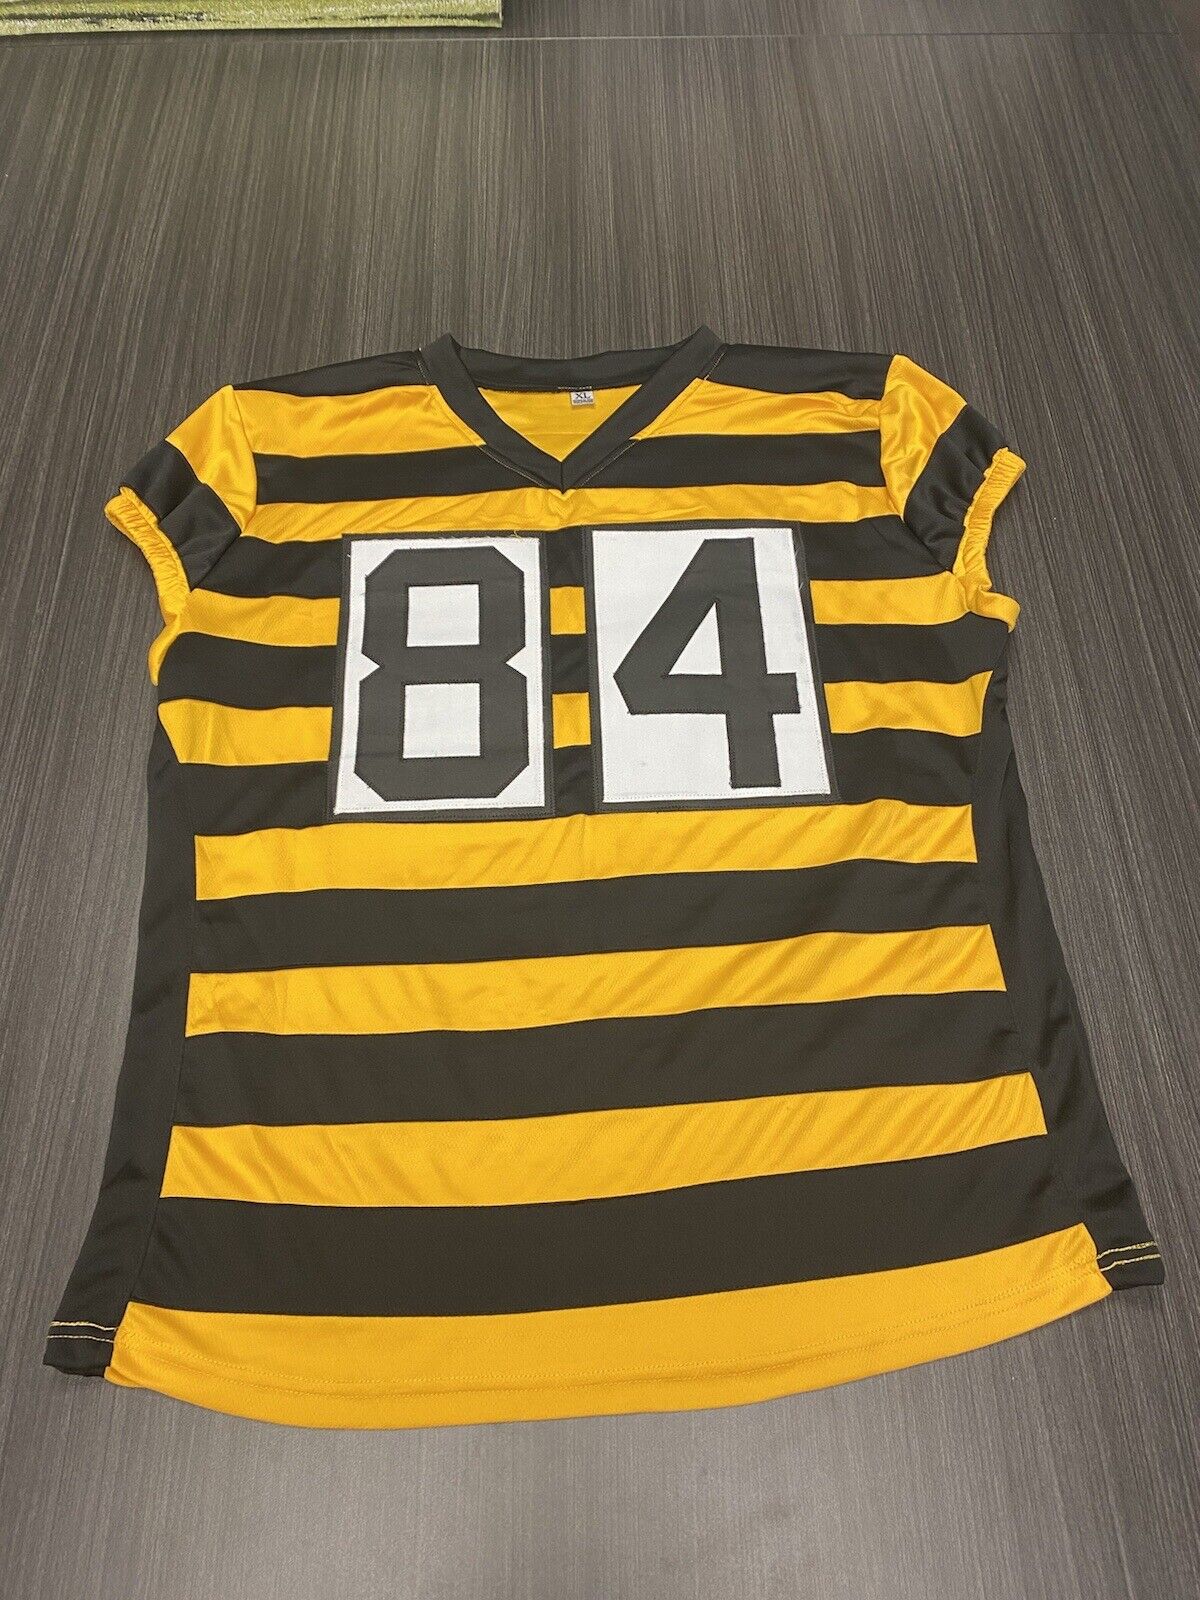 pittsburgh steelers bumblebee jersey for sale